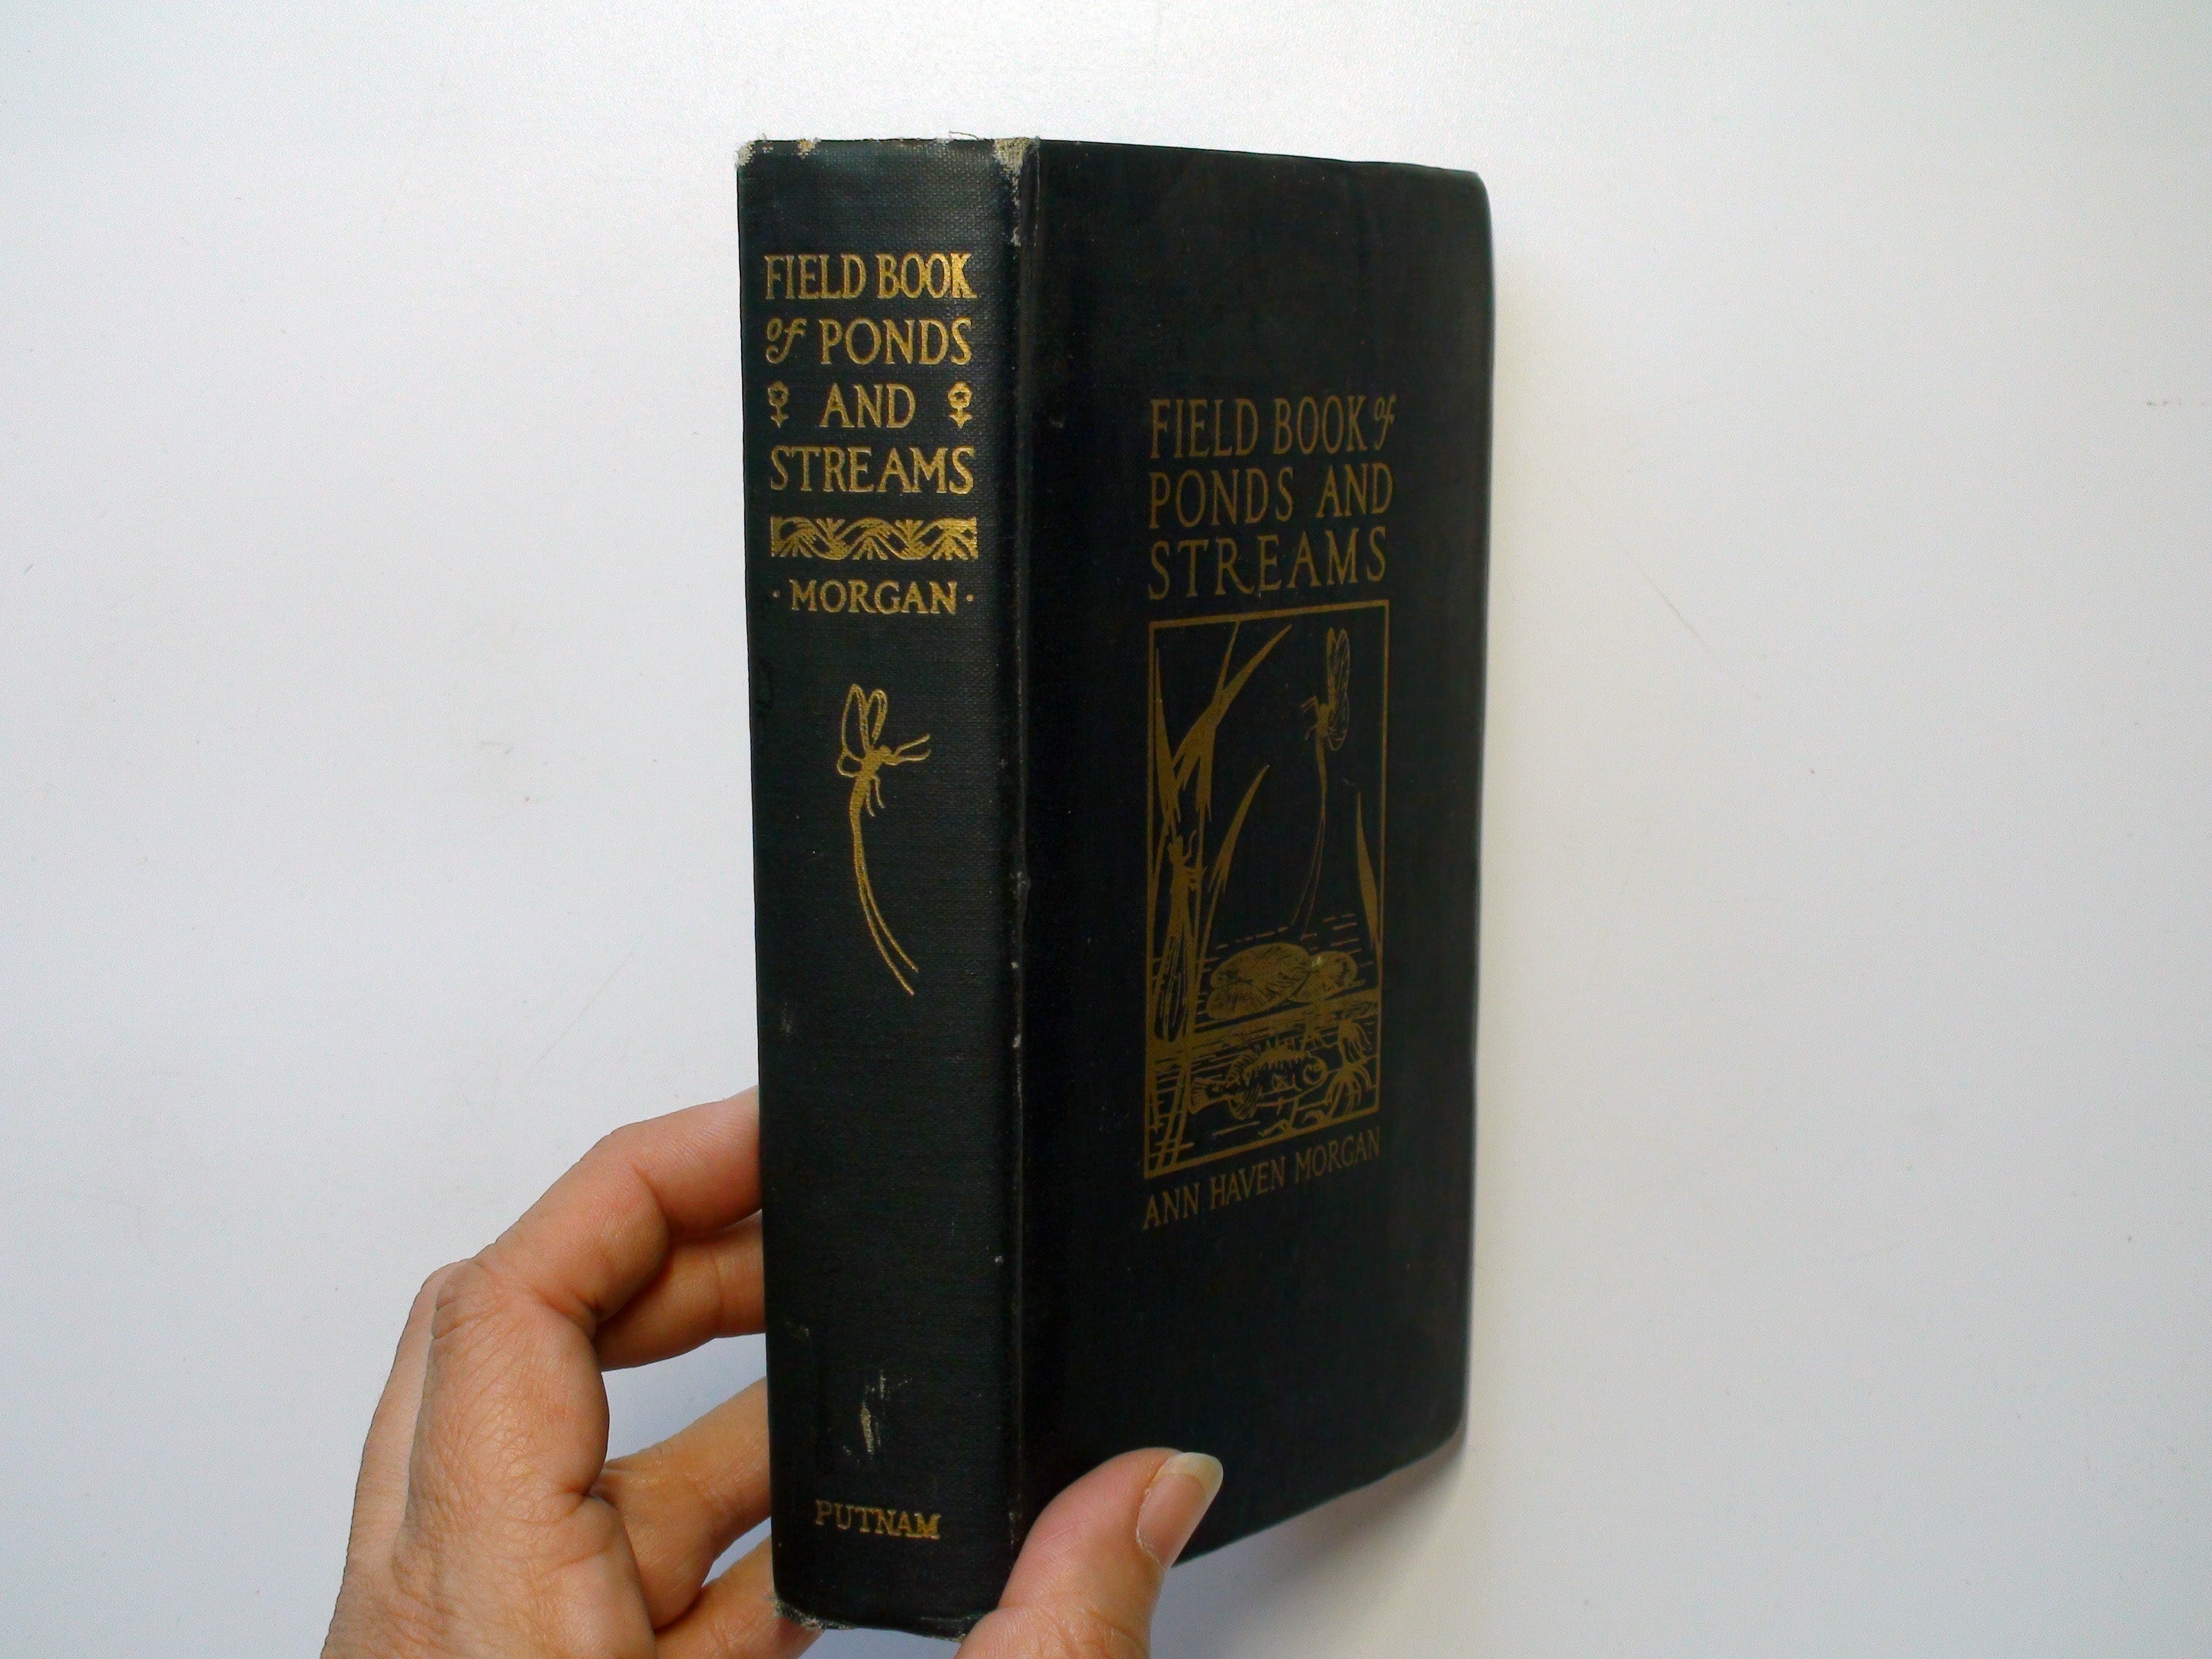 Field Book of Ponds and Streams, Ann Haven Morgan, Illustrated, 4th Ed, 1936